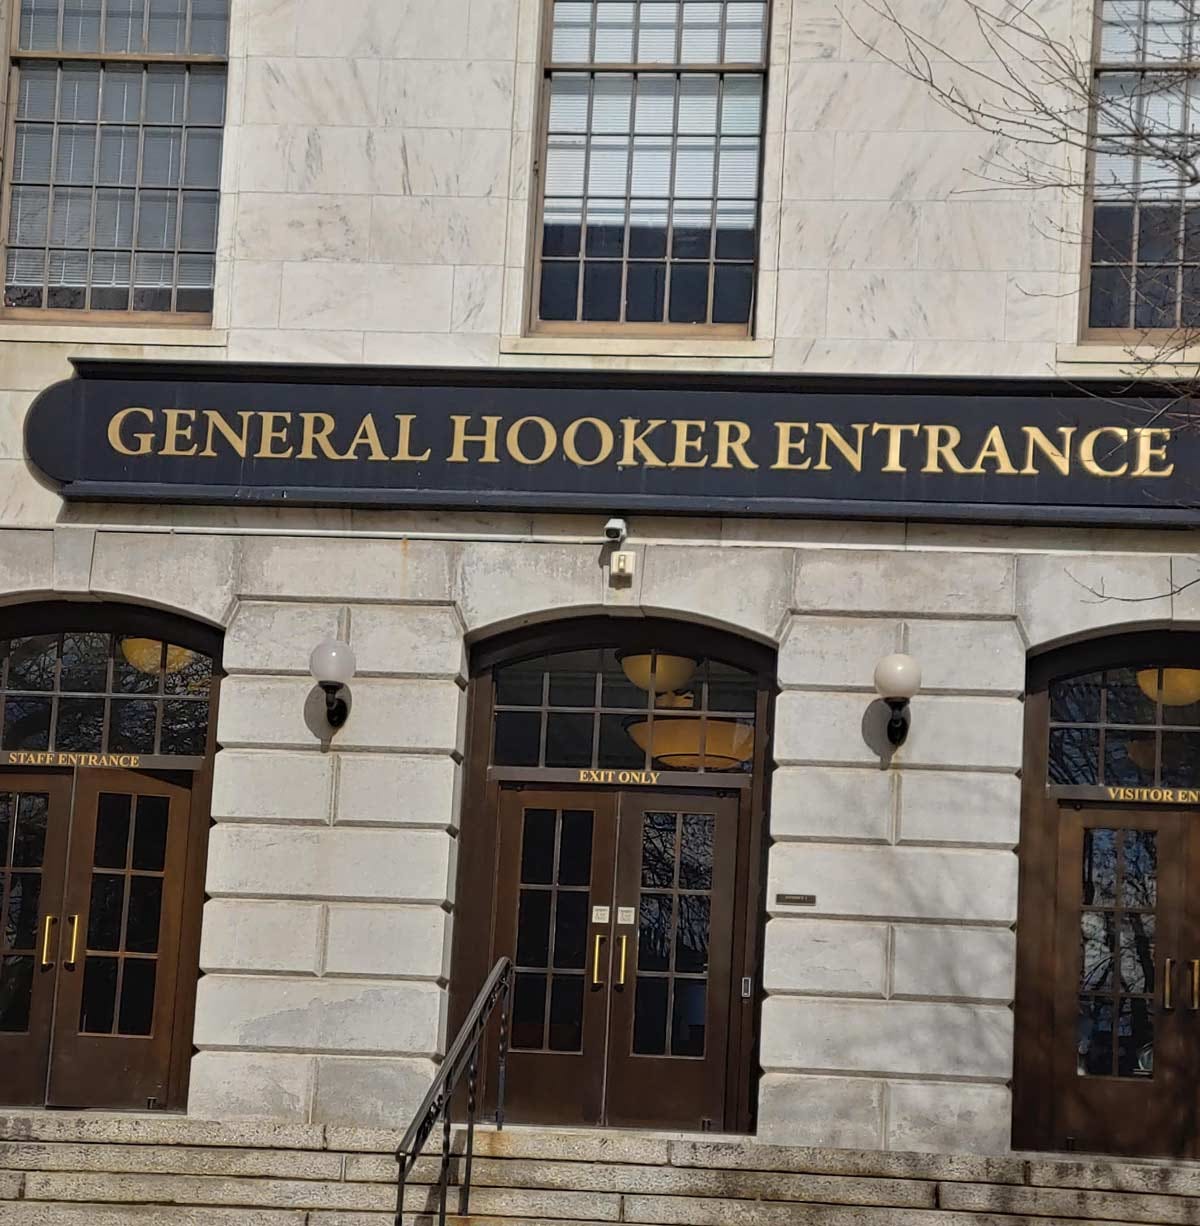 Specific hookers use side entrance